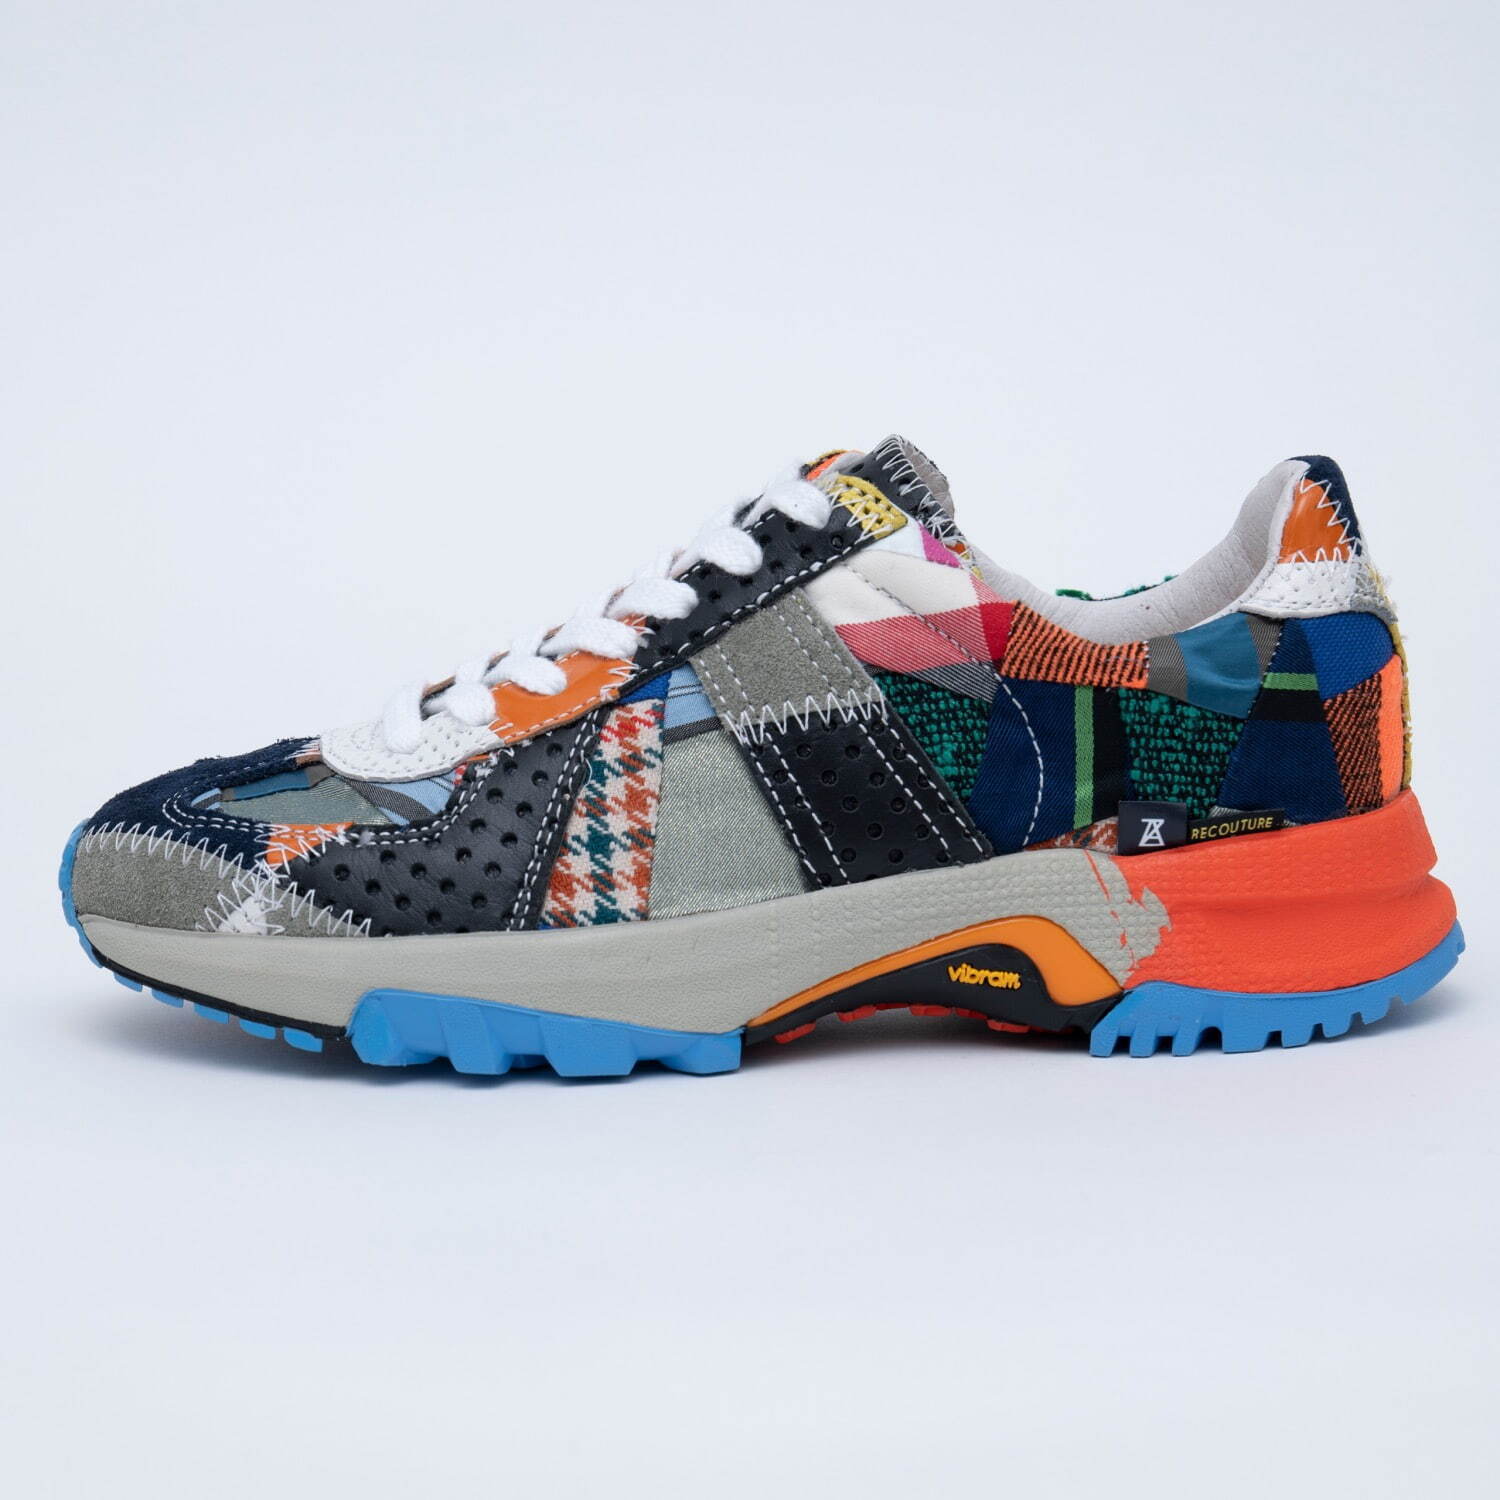 RECOUTURE X ANREALAGE PATCHWORK GERMAN TRAINER 107,800円